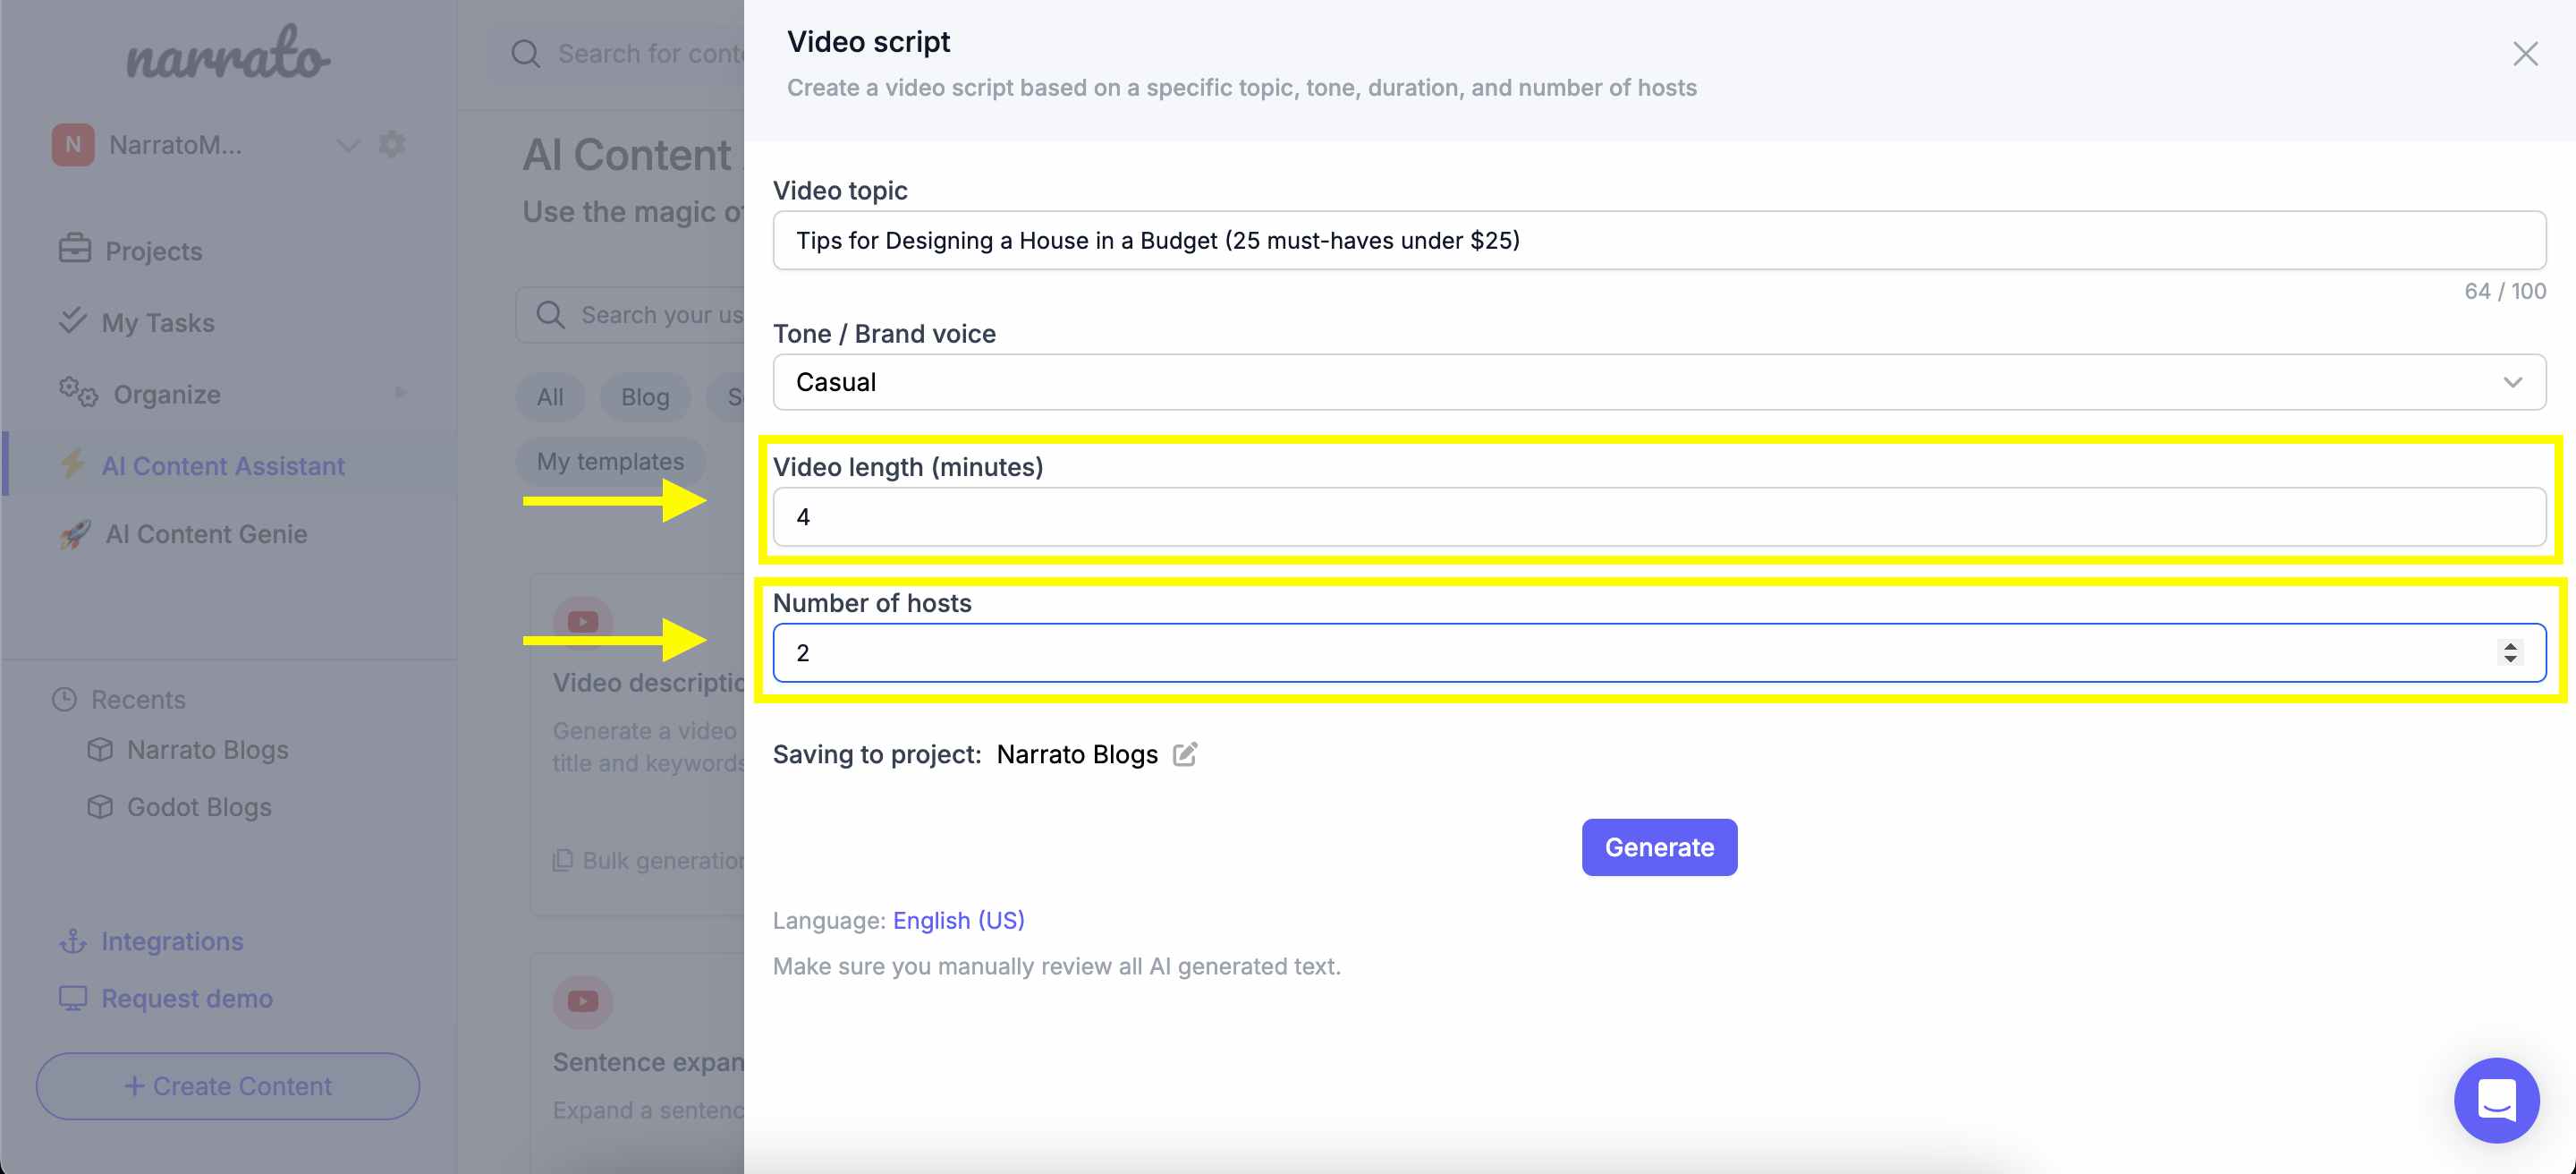 Specifying the video length and number of hosts